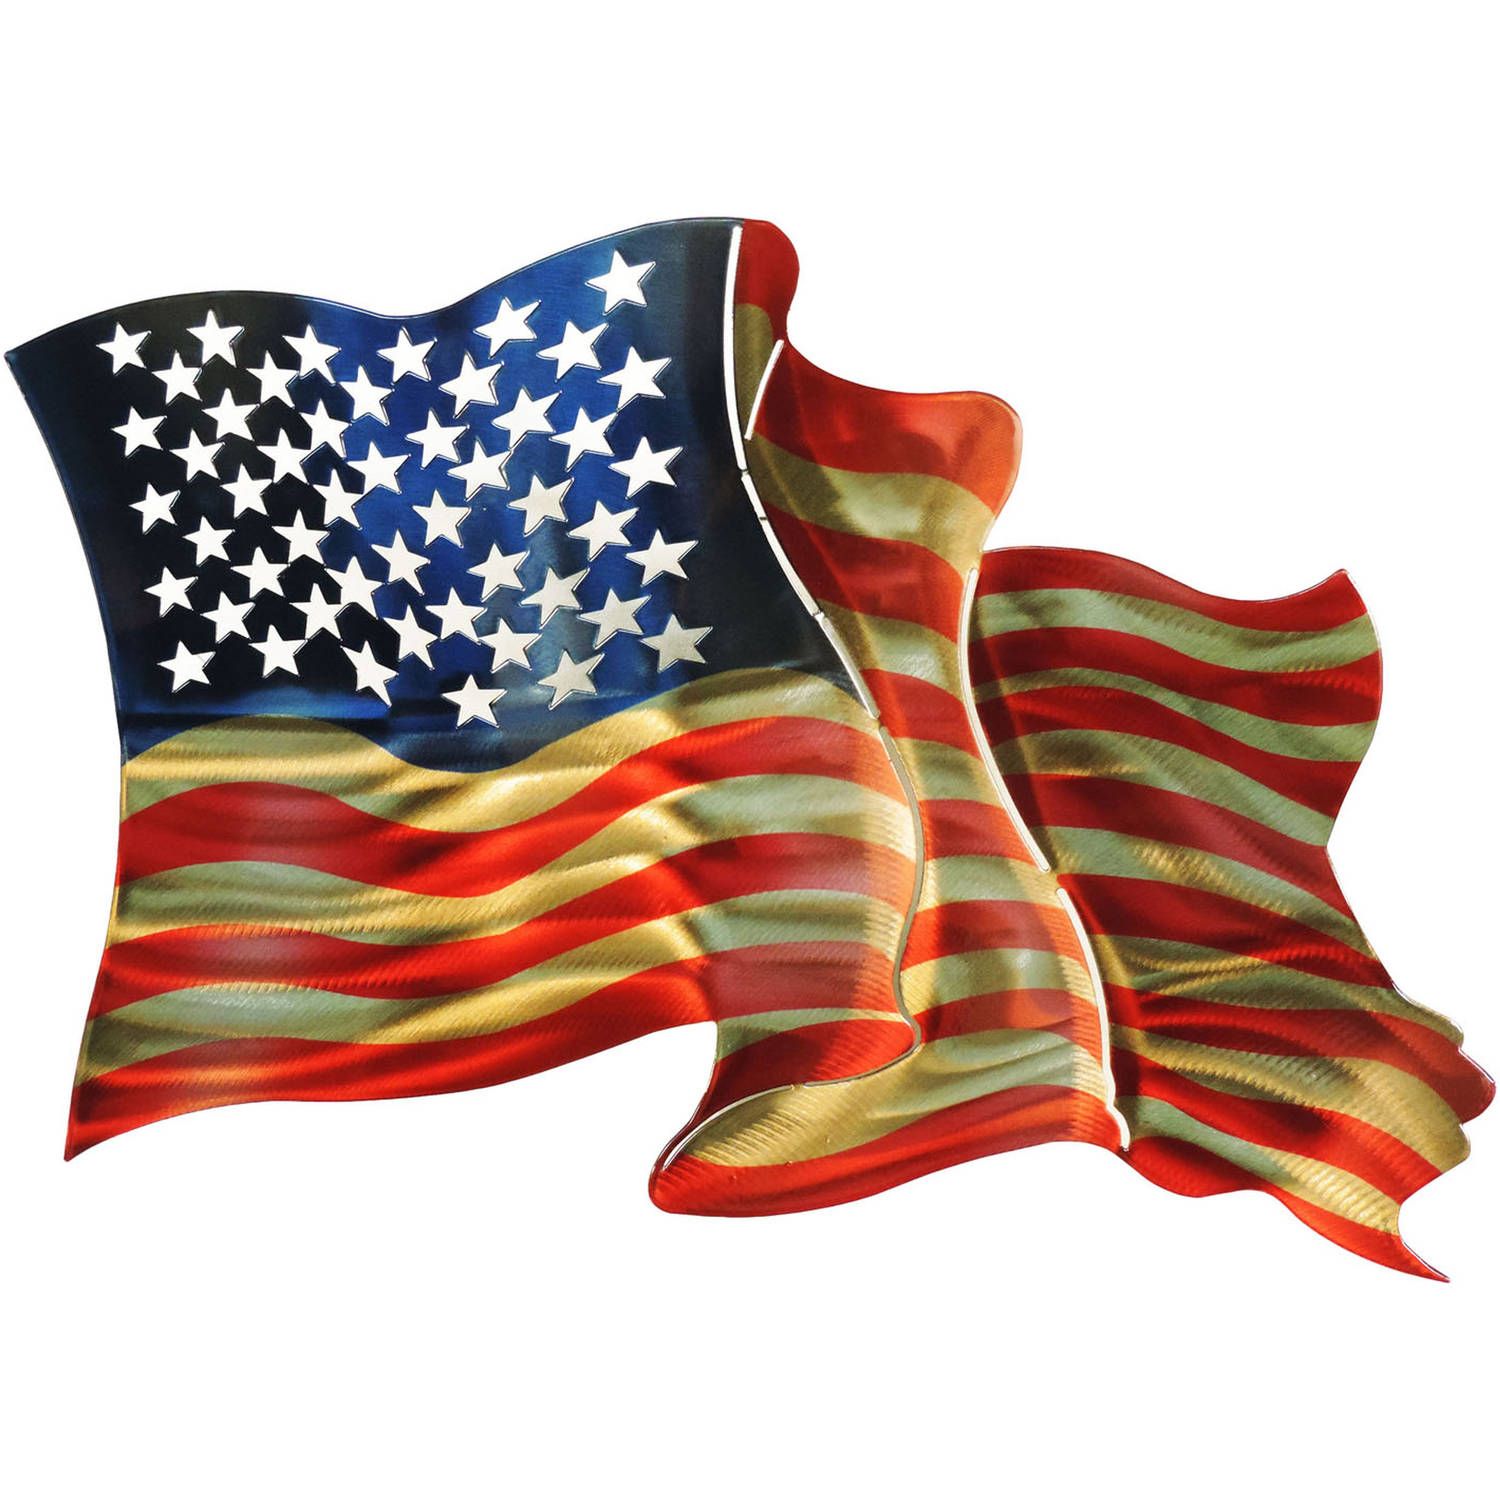 Featured Photo of 30 Photos American Flag 3d Wall Decor